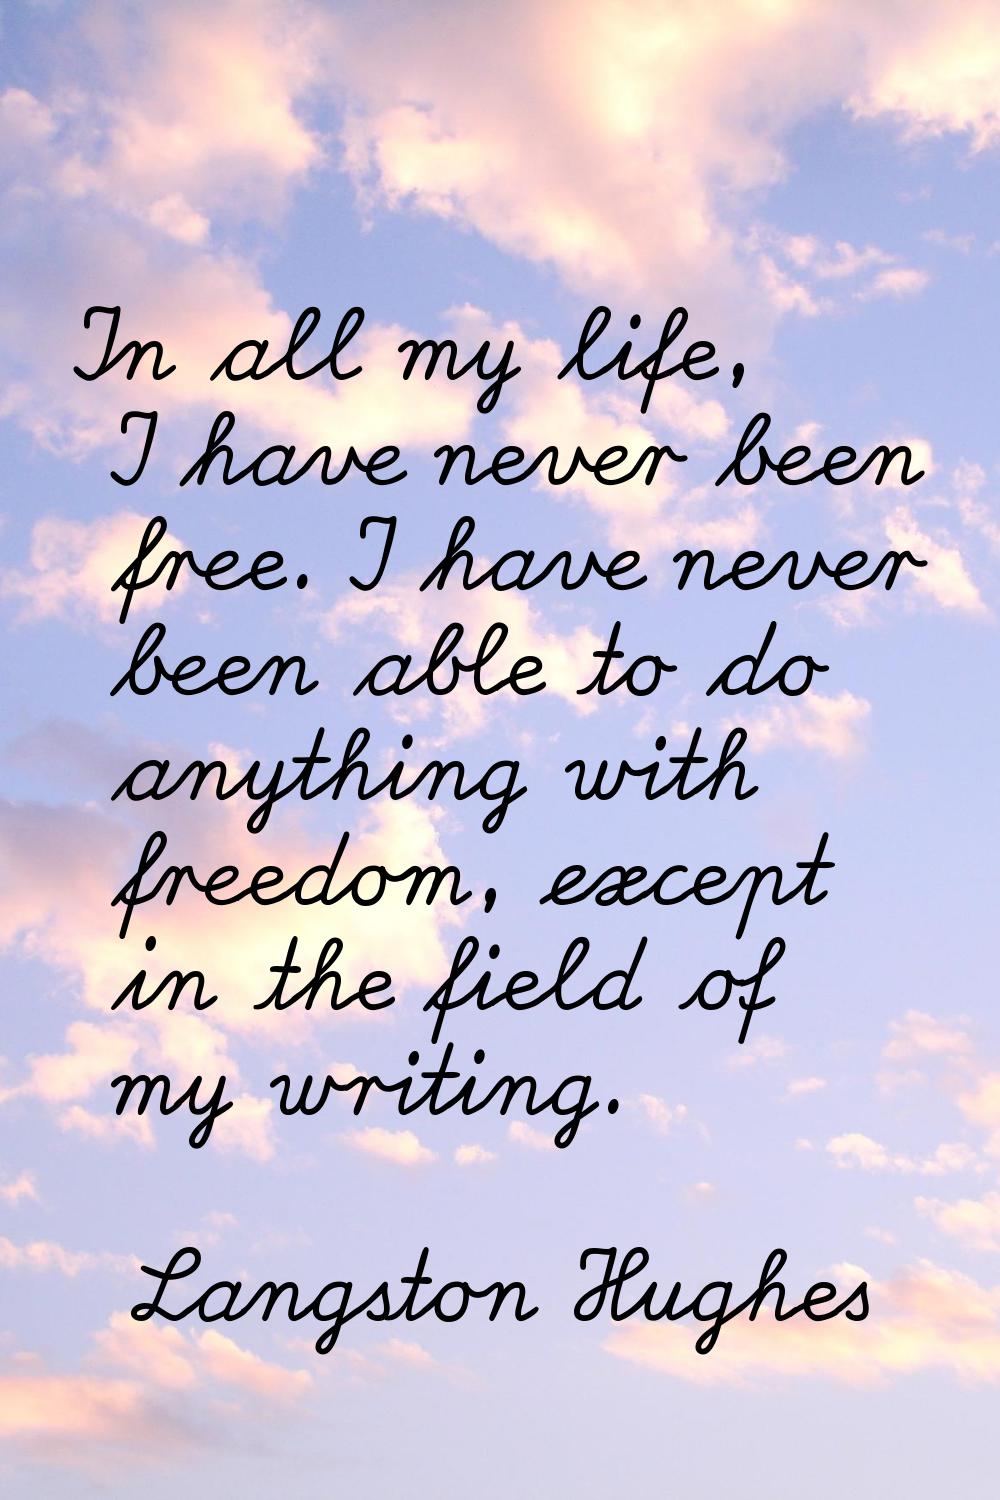 In all my life, I have never been free. I have never been able to do anything with freedom, except 